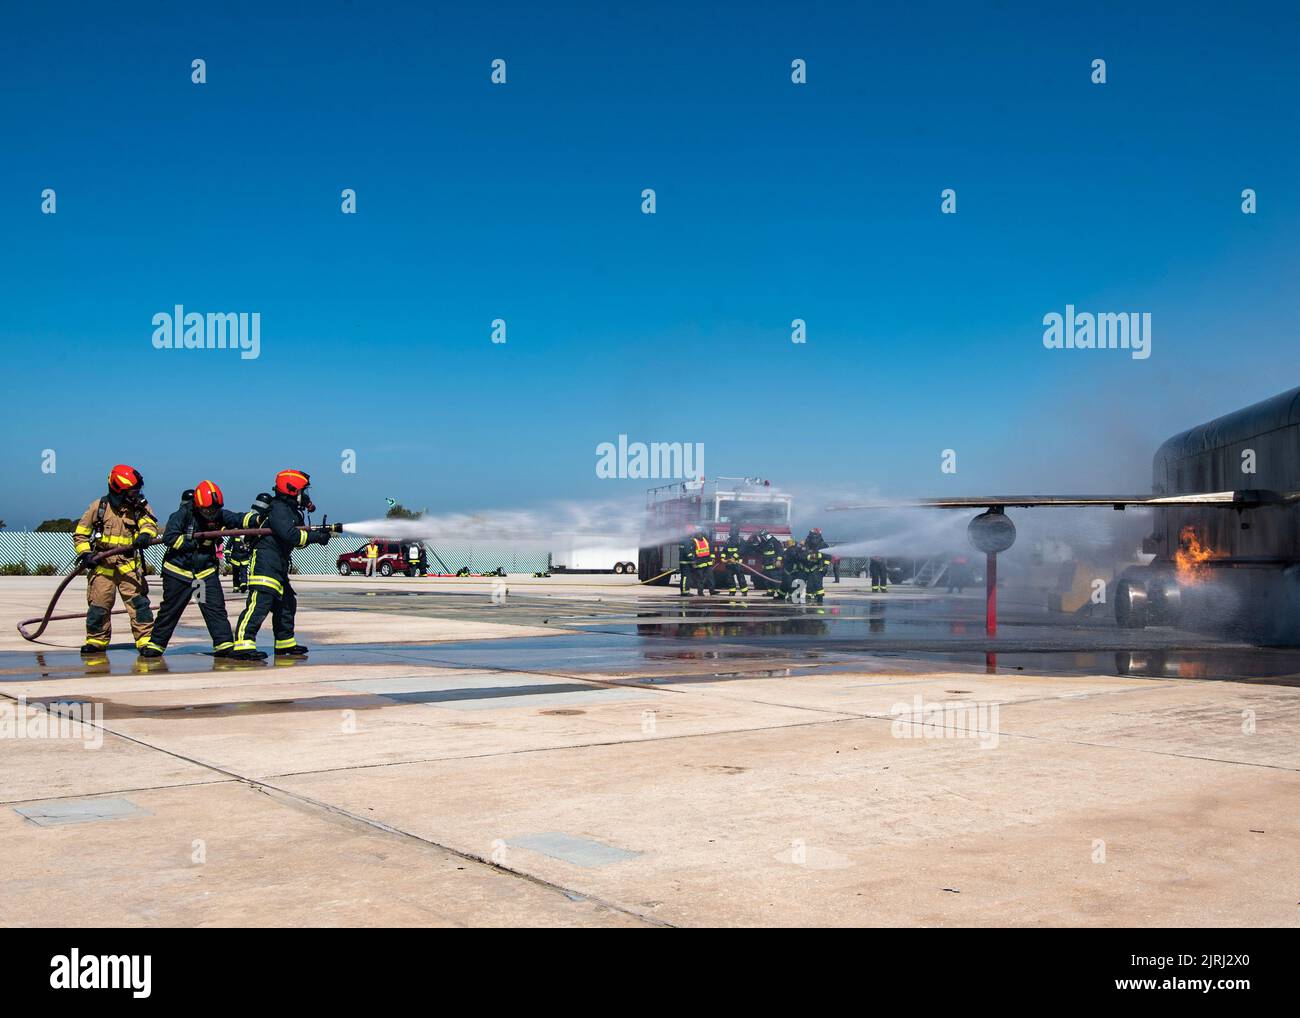 NAVAL STATION ROTA, Spain (Aug. 23, 2022) Naval Station (NAVSTA) Rota Fire and Emergency Services fight a fire from a simulated plane crash during a flight line emergency drill on NAVSTA Rota, Spain, Aug. 23, 2022. Naval Station Rota sustains the fleet, enables the fighter and supports the family by conducting air operations, port operations, ensuring security and safety, assuring quality of life and providing the core services of power, water, fuel and information technology. (U.S. Navy photo by Mass Communication Specialist 2nd Class Jacob Owen.) Stock Photo